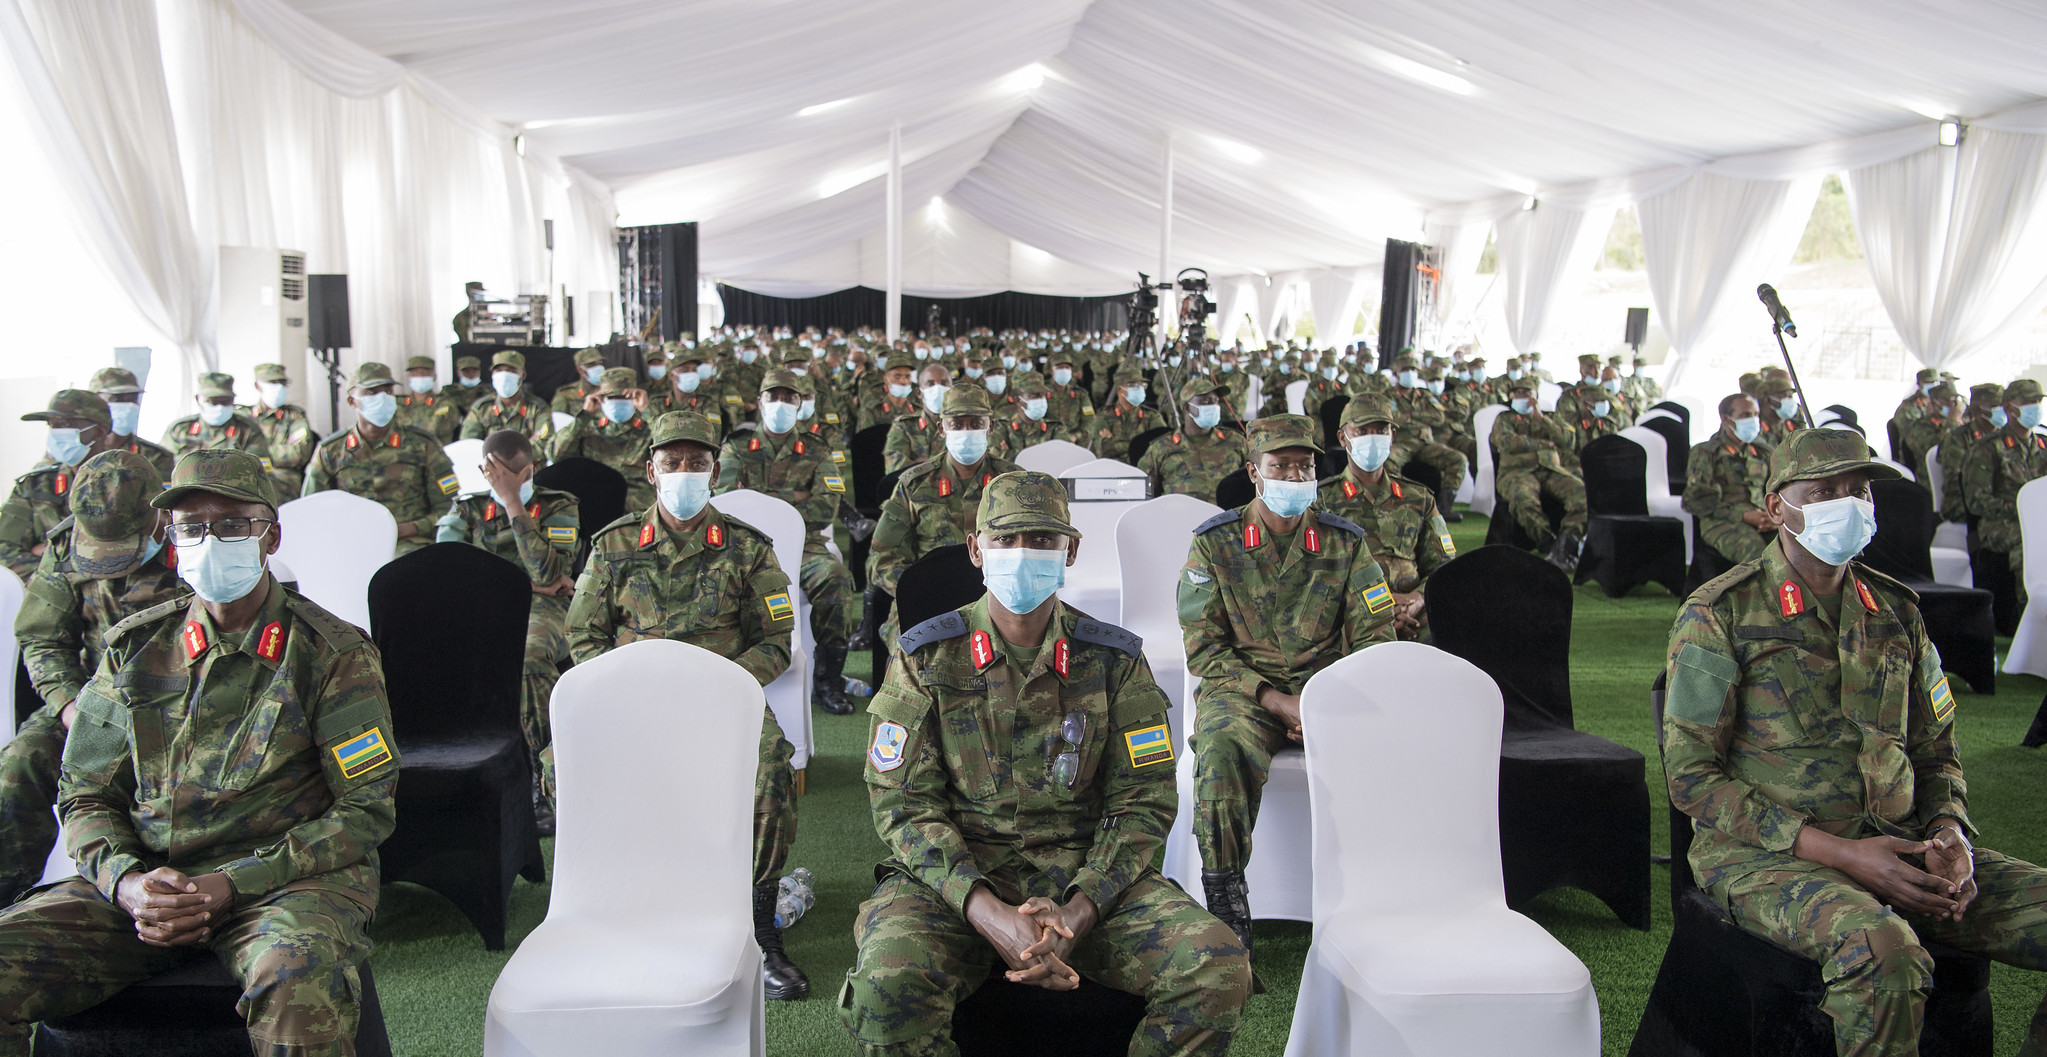 President Kagame arrives at the Rwanda Military Academy in Gako for a periodic meeting of the Rwanda Defense Forces (RDF) Command Council. / Village Urugwiro